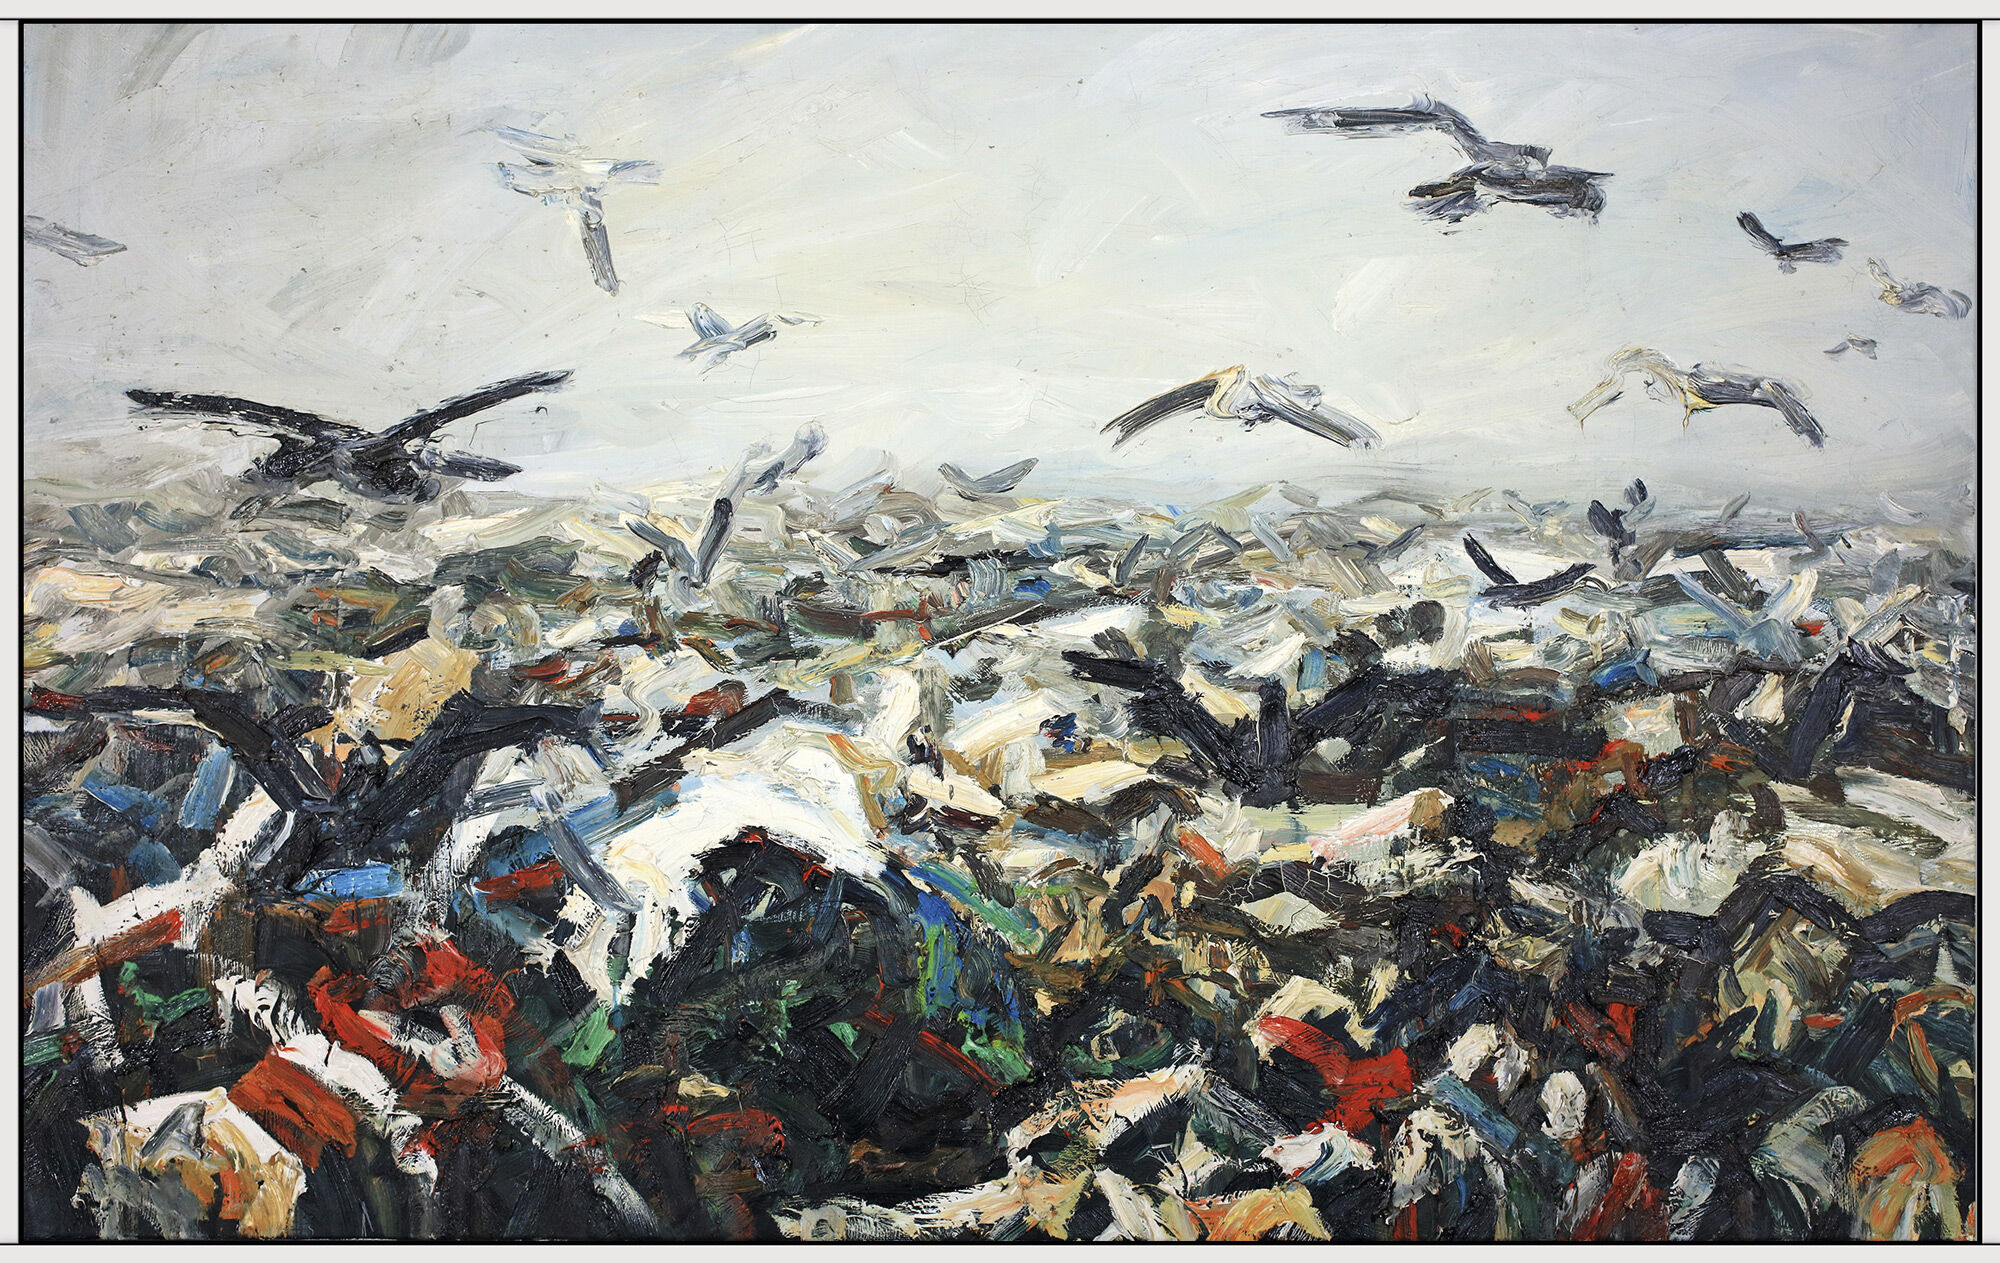 Picture "Mountain of Rubbish XII" (1986) (Unique piece) by Ralph Fleck